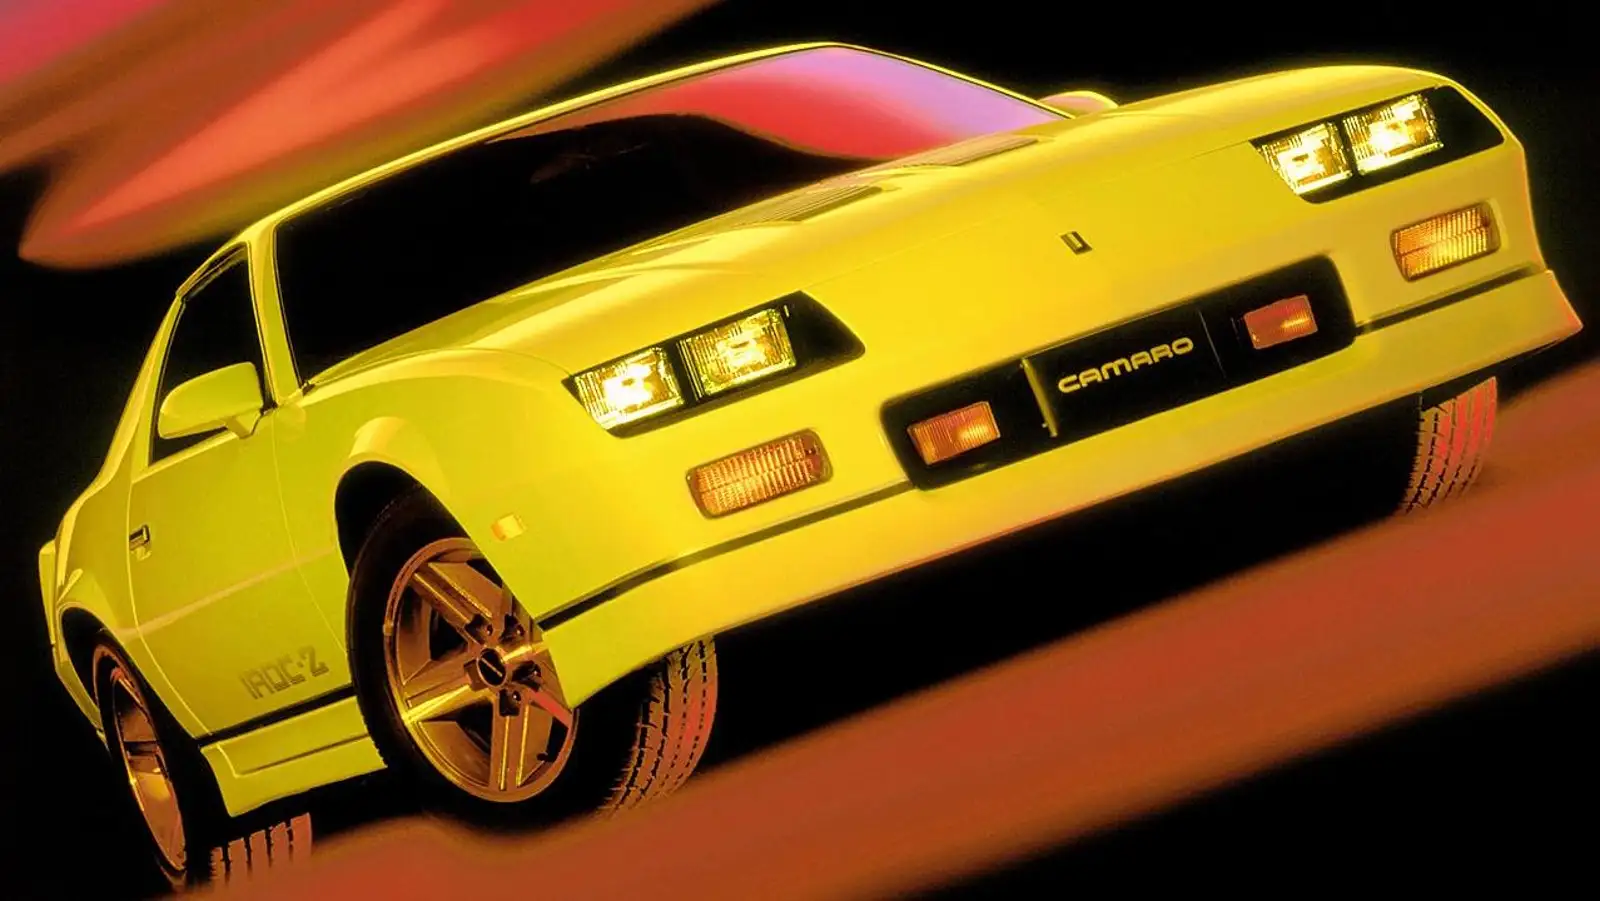 These are the real cars the GTA VI cars are inspired by